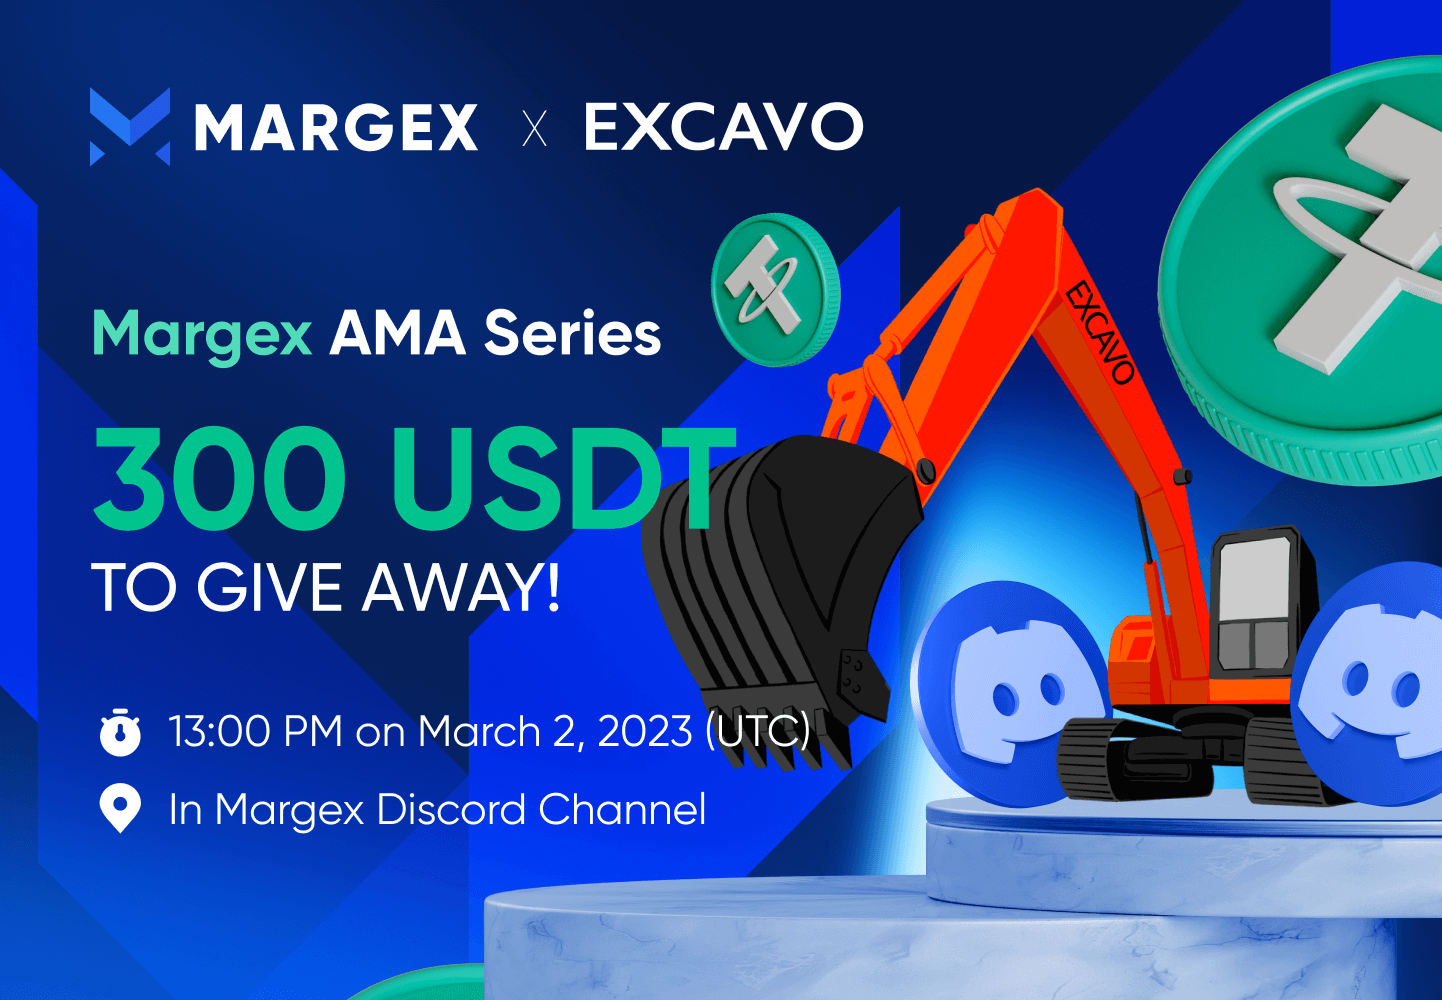 Join the Margex AMA with EXCAVO, 300 USDT Rewards to Give Away!